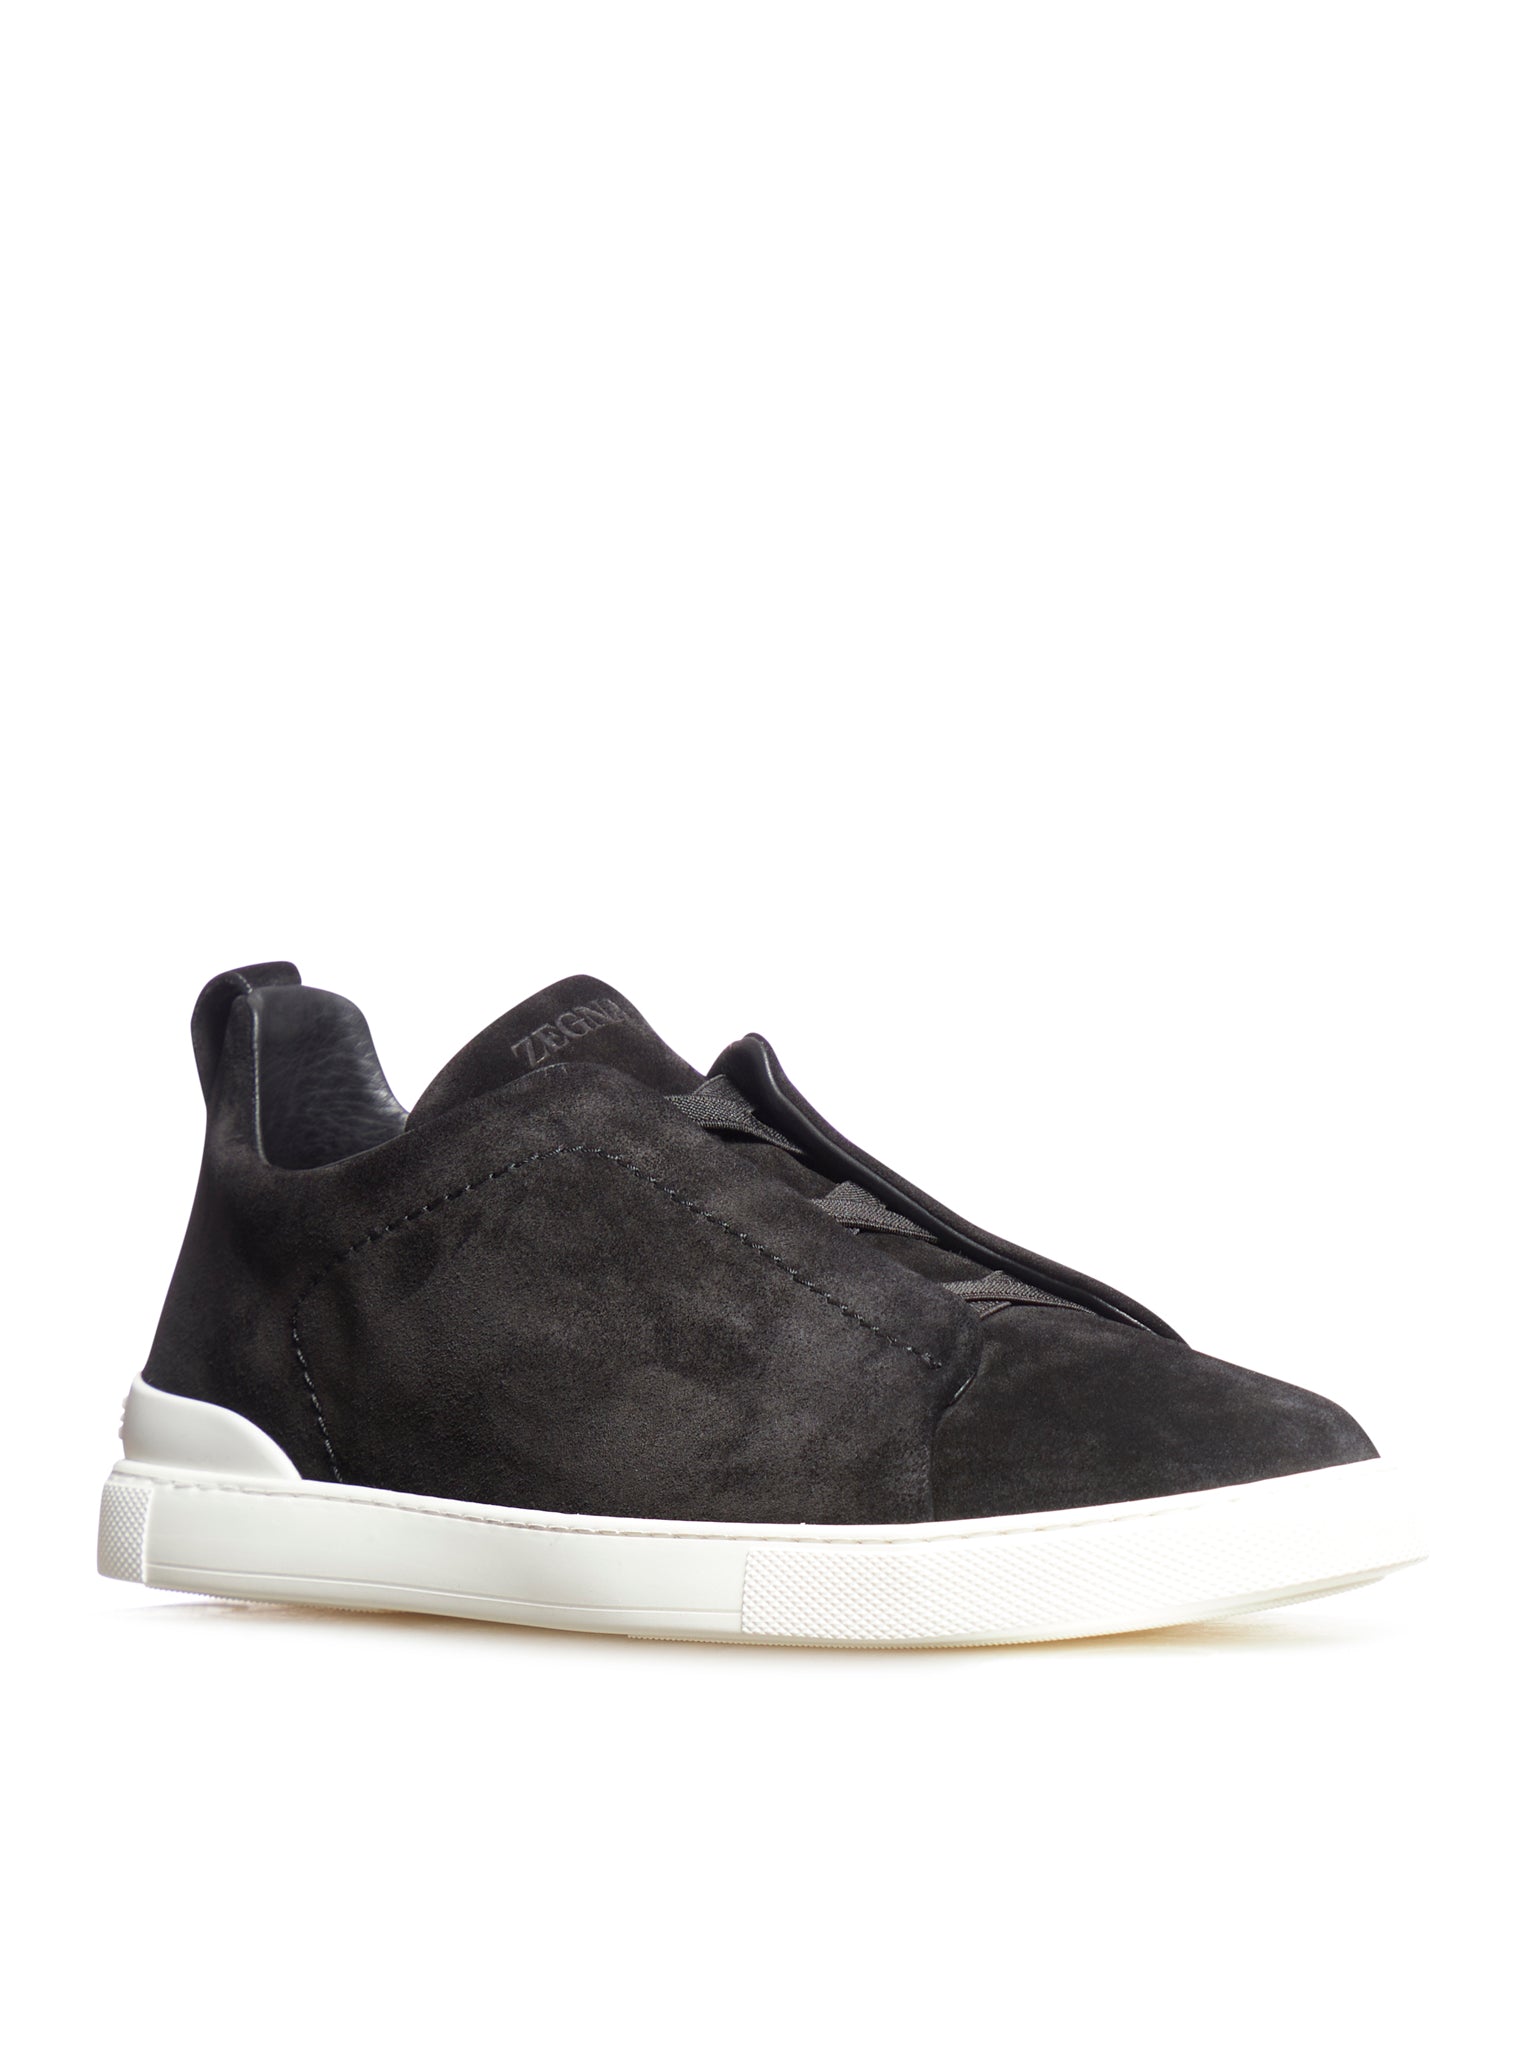 Triple Stitch Zegna sneakers in suede